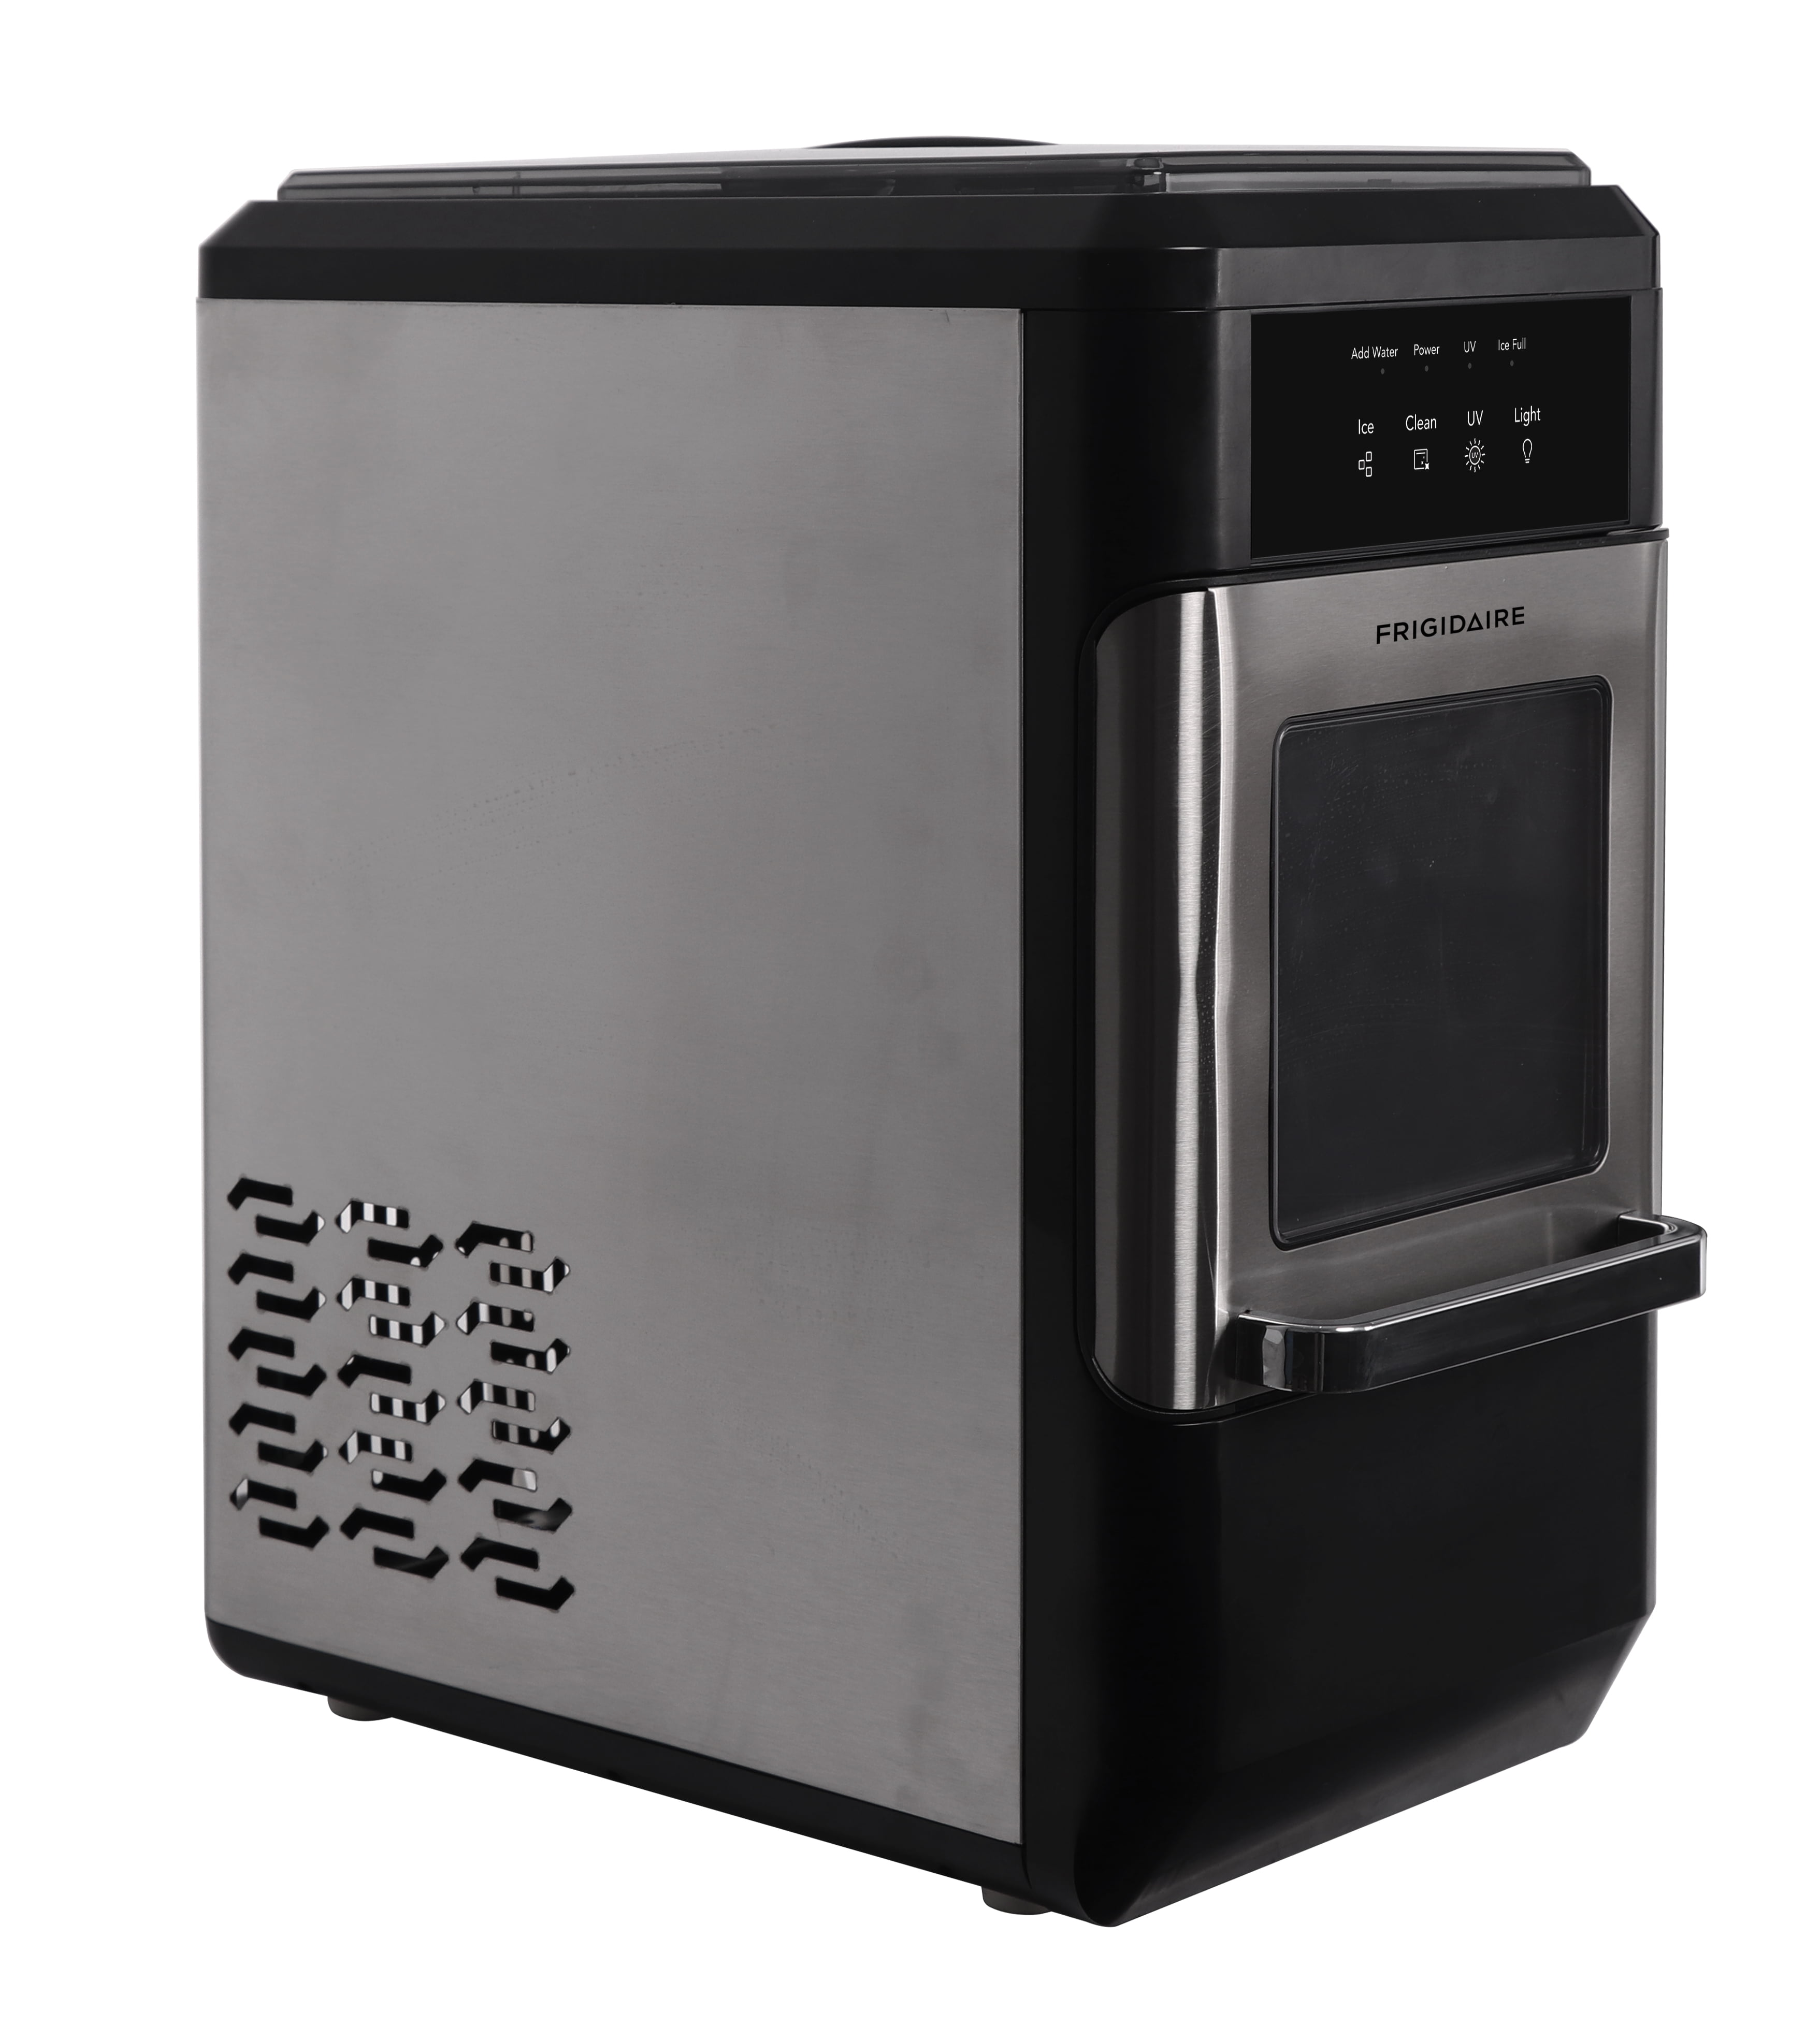 Frigidaire EFIC237 Countertop Crunchy Chewable Nugget Ice Maker, 44lbs per  day, Auto Self Cleaning, Black Stainless